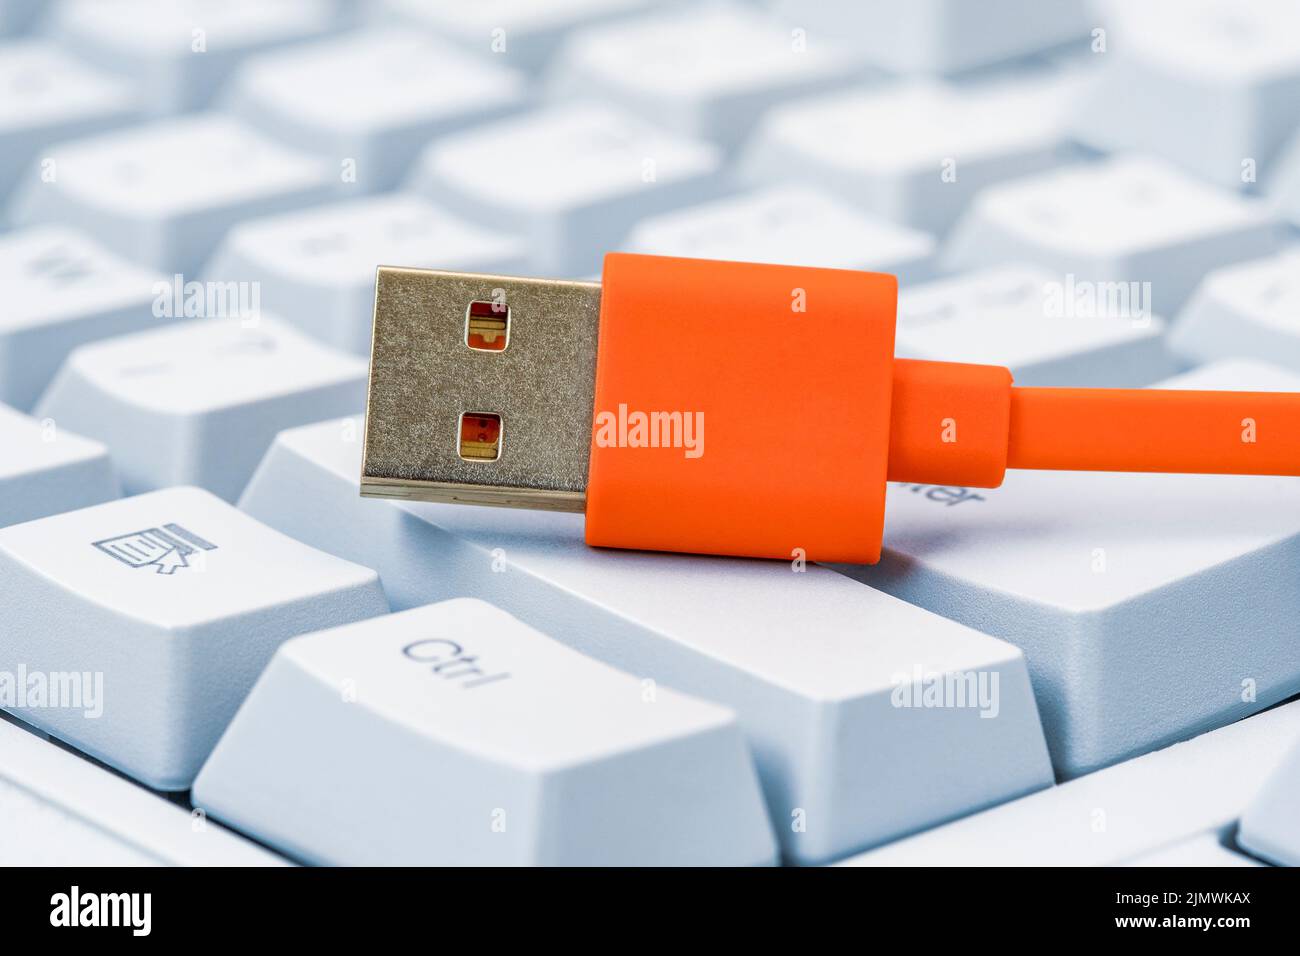 Computer keyboard with big buttons and orange USB cable Stock Photo